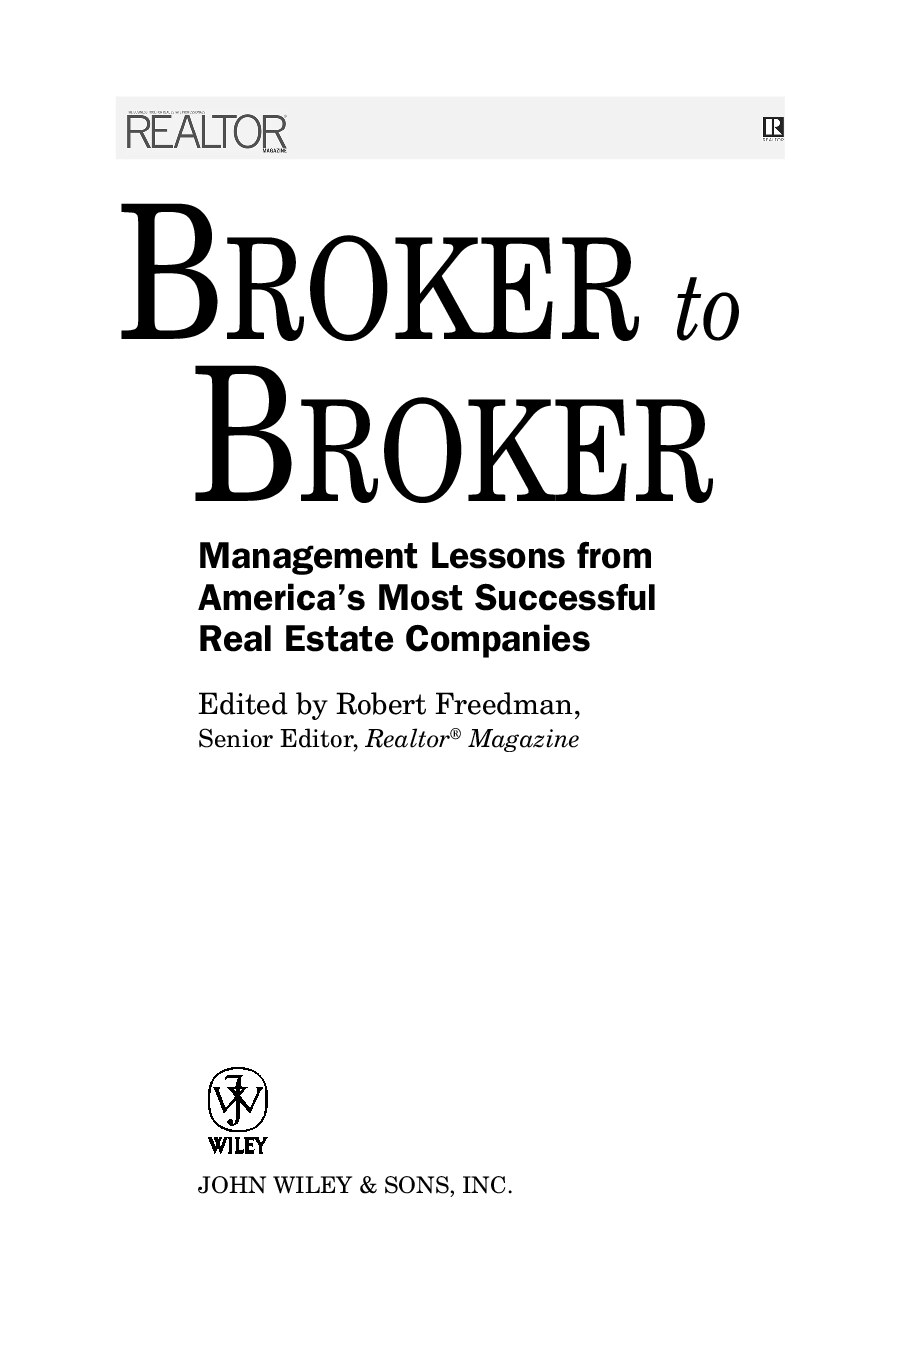 Broker to Broker_ Management Lessons From America's Most Successful Real Estate Companies, (2005)